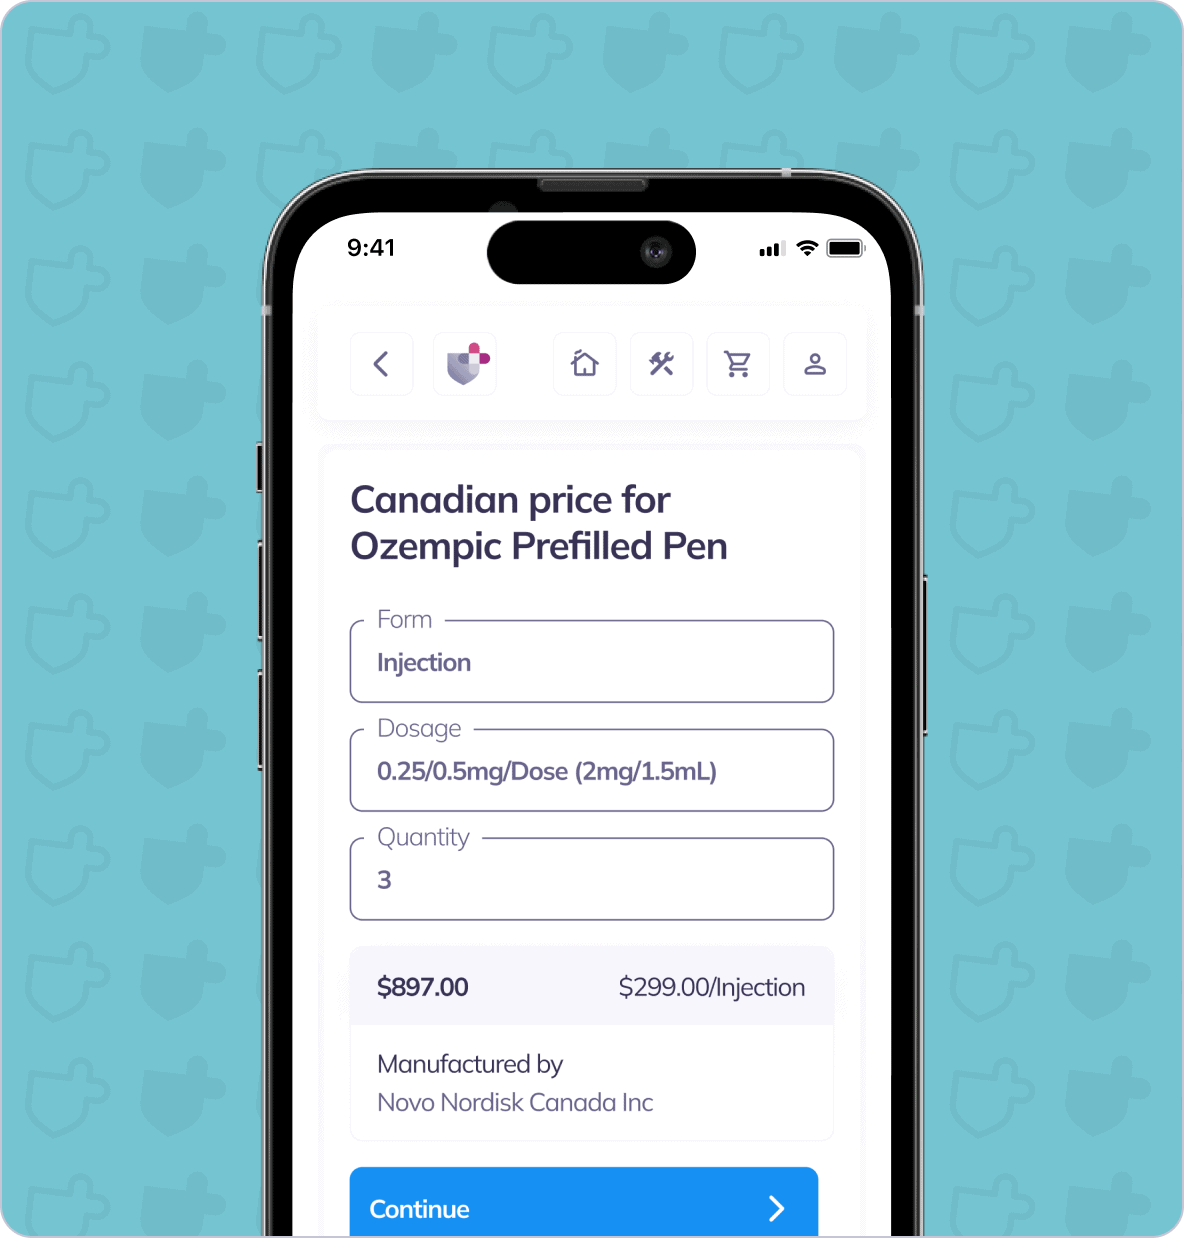 Smartphone screen showing a web page detailing the Canadian price for Ozempic Prefilled Pen. Dosage is 0.25/0.5mg per dose, with a total quantity of 3 injections priced at $897.00.